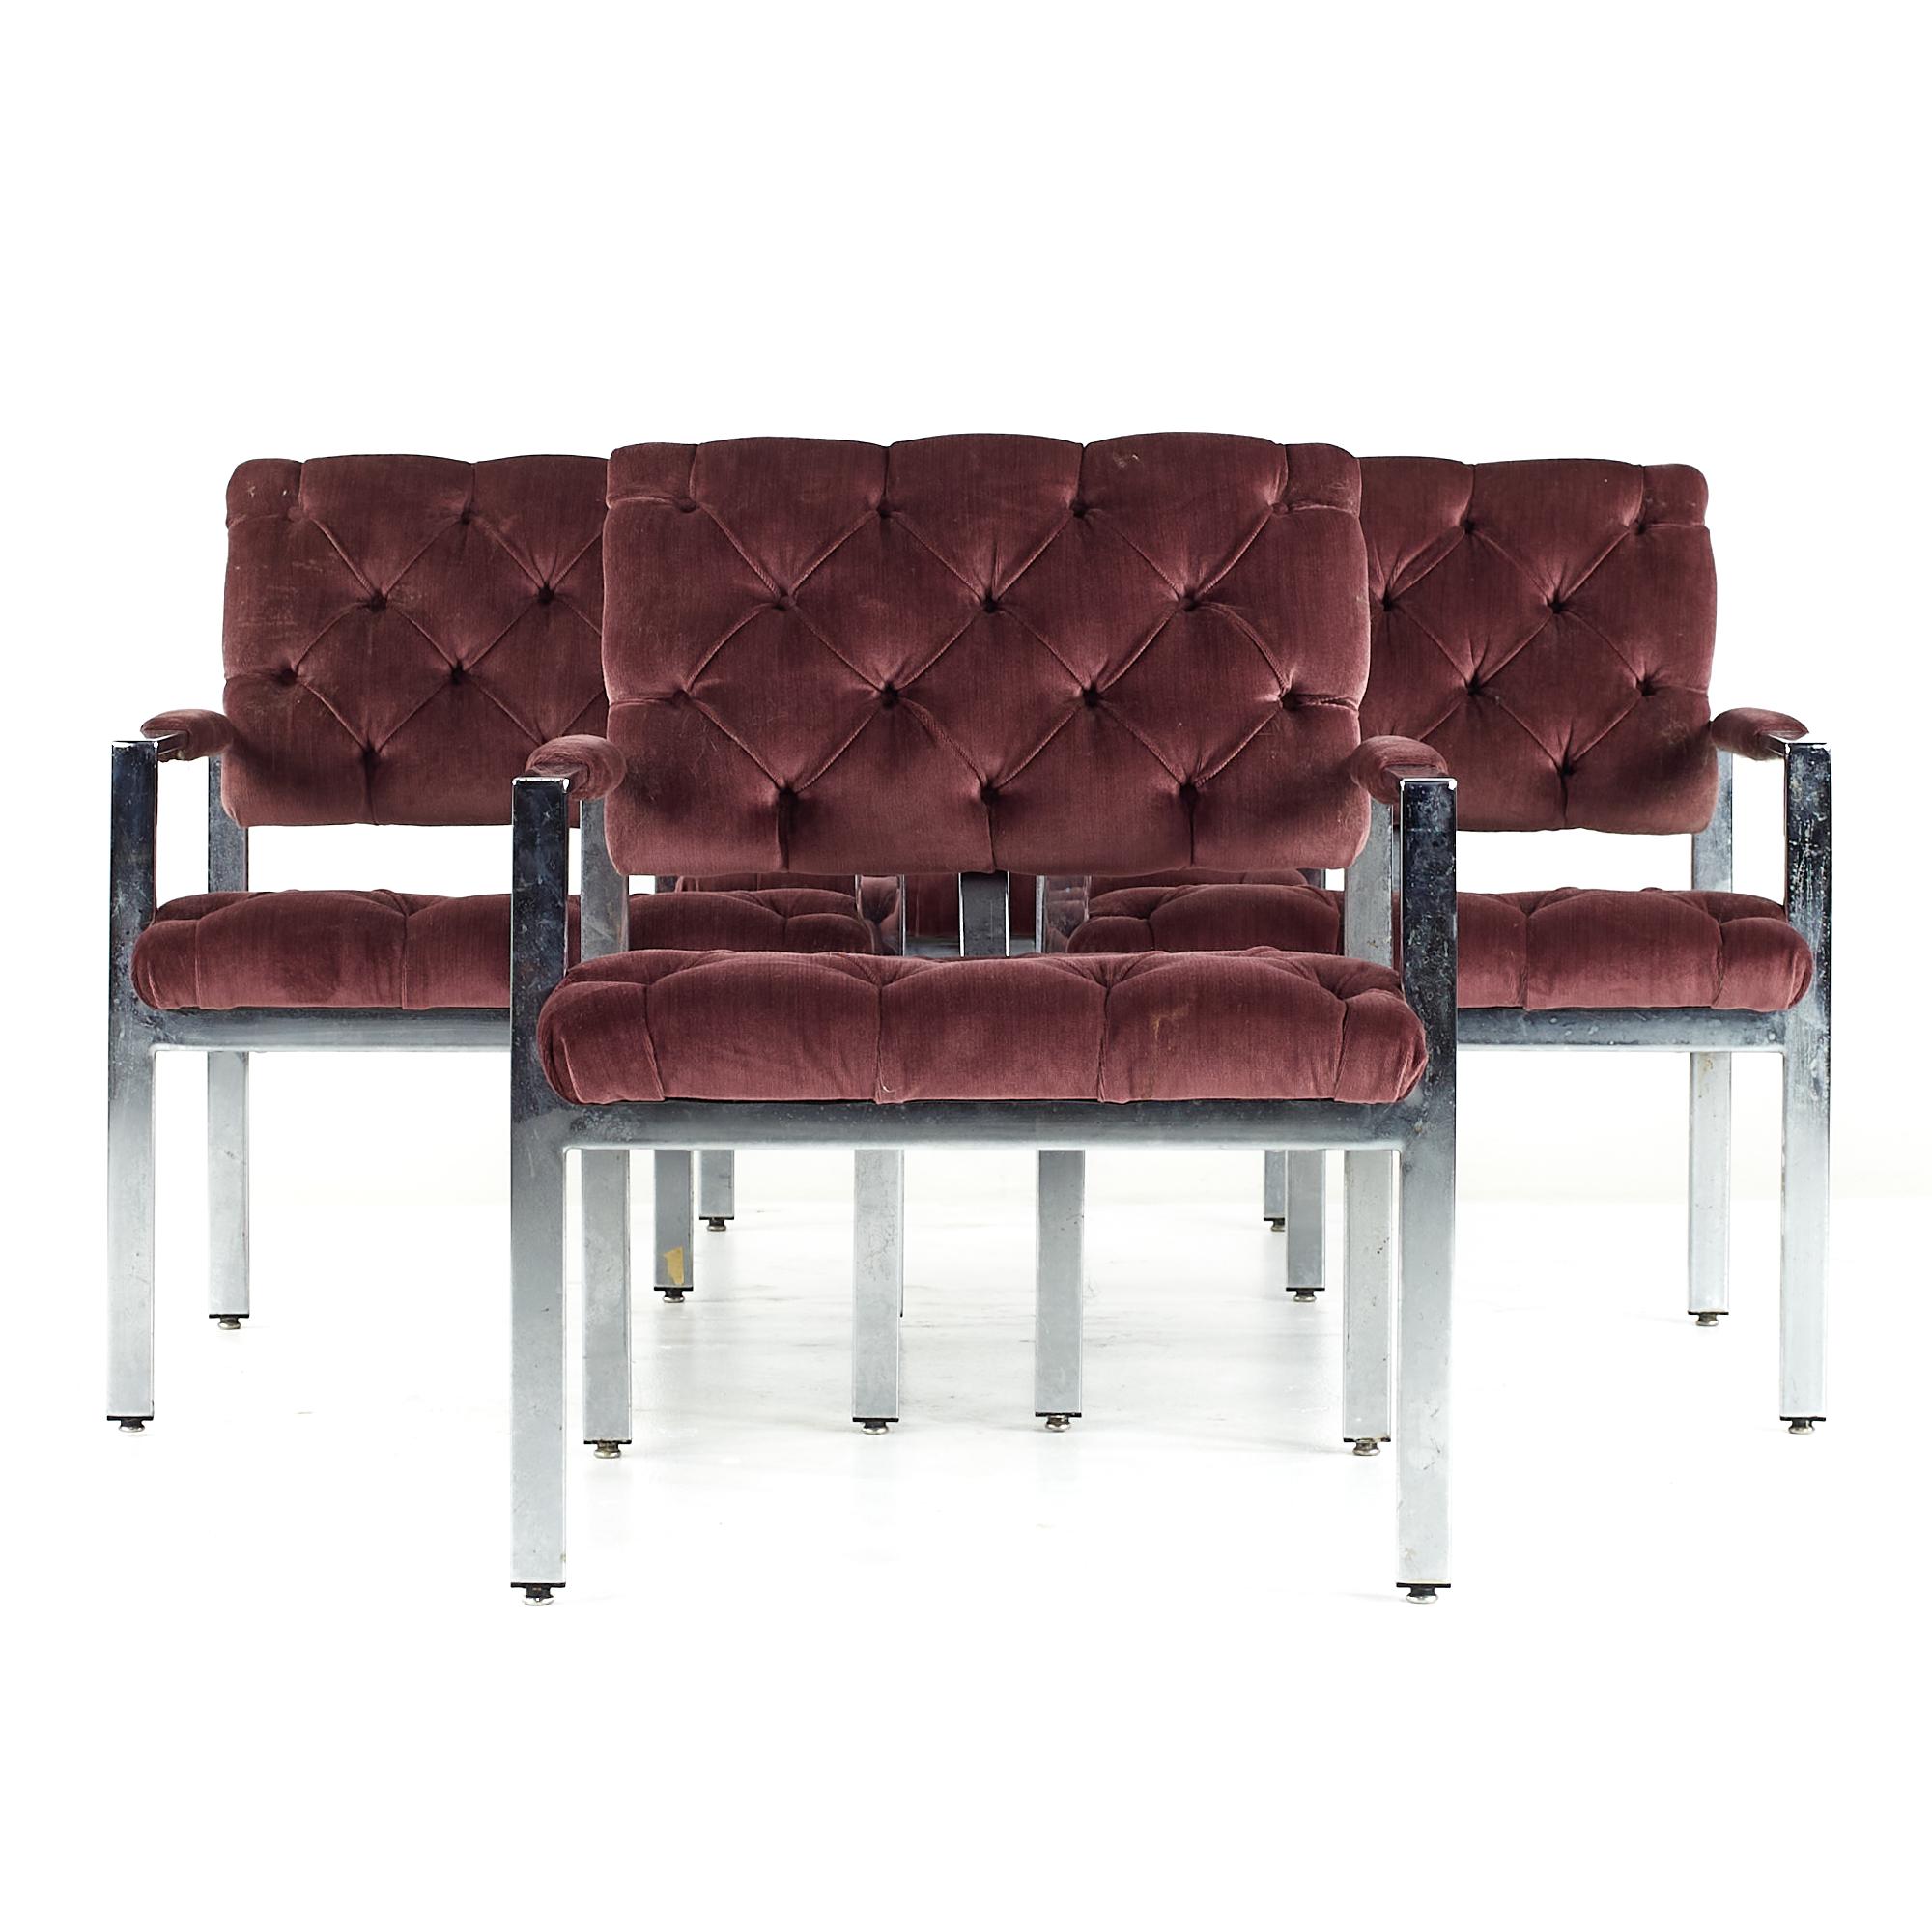 American Milo Baughman for Thayer Coggin Midcentury Chrome Tufted Arm Chairs, Set of 6 For Sale